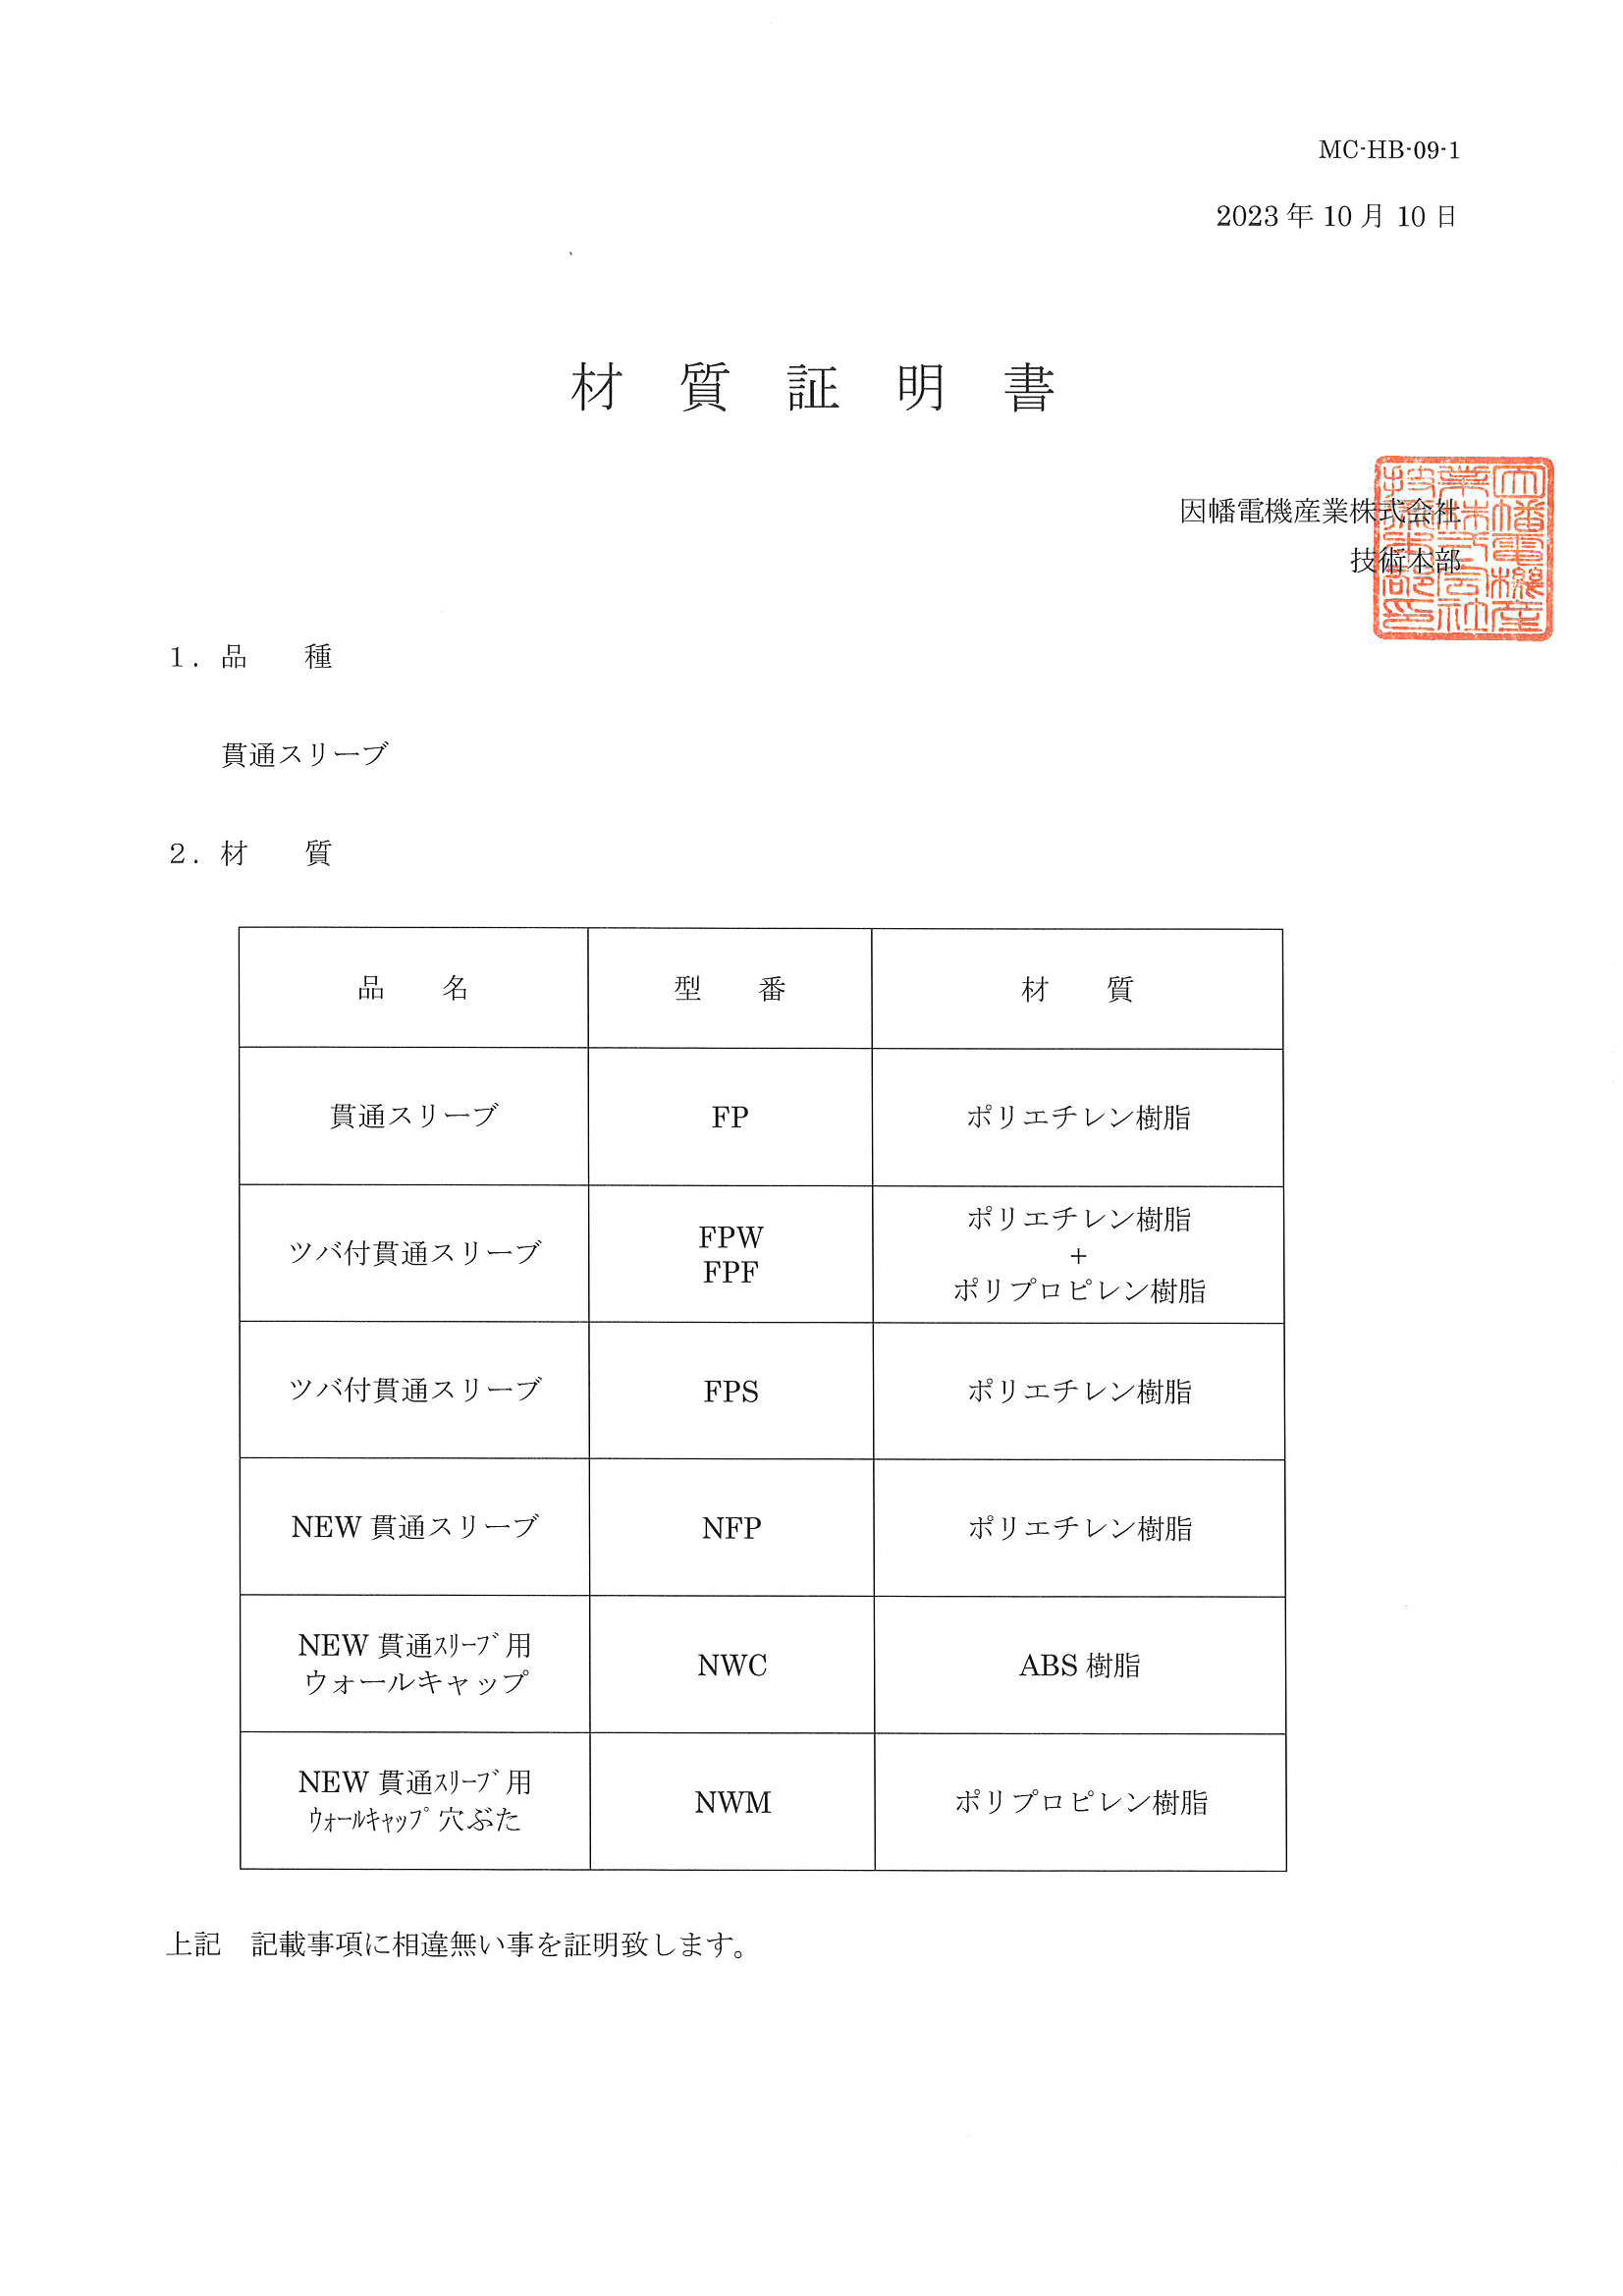 FP,FPW,FPF,FPS,NFP,NWC,NWM_材質証明書_20231010.pdf